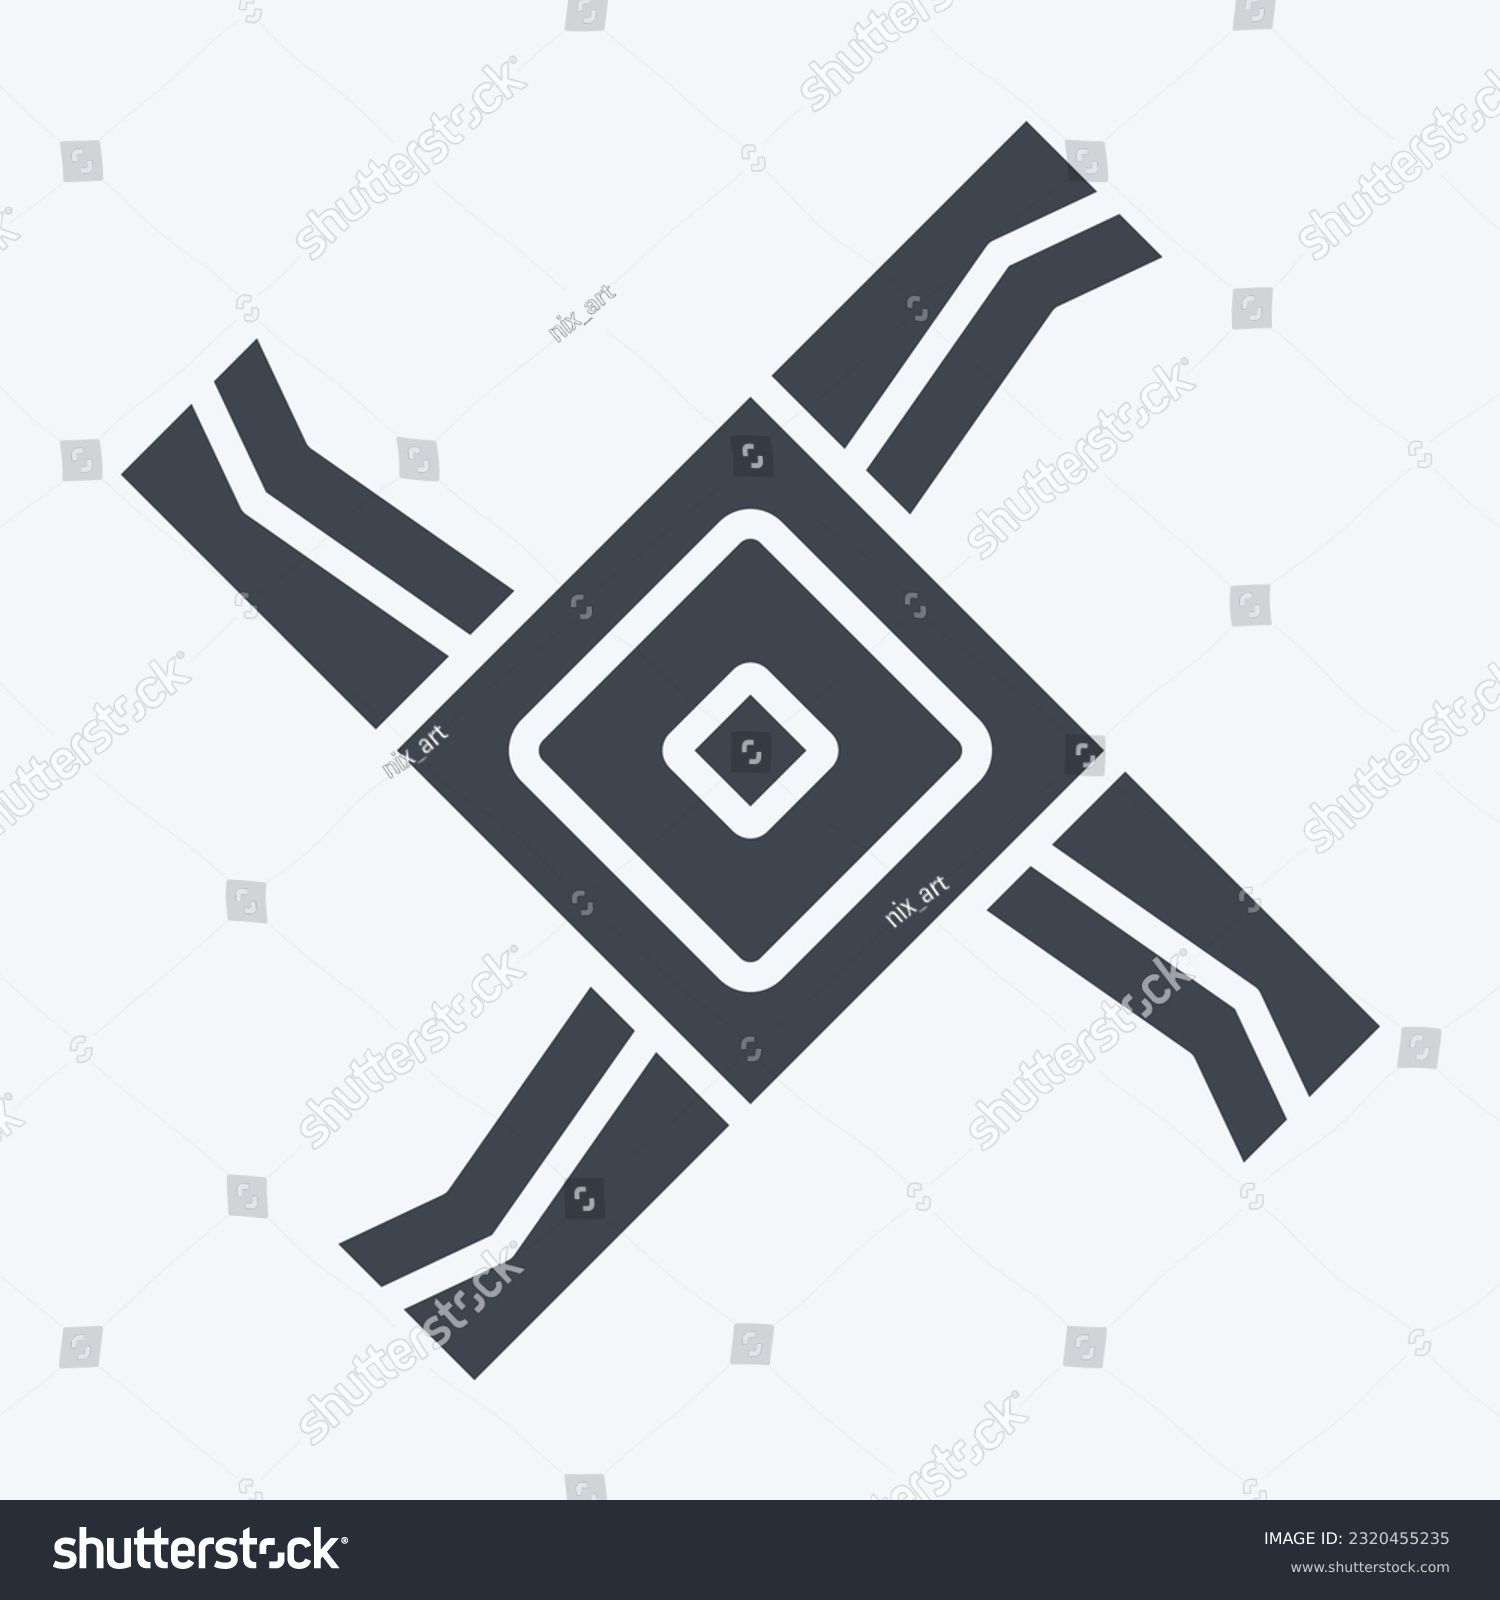 SVG of Icon Brigid Cross. related to Celtic symbol. glyph style. simple design editable. simple illustration svg